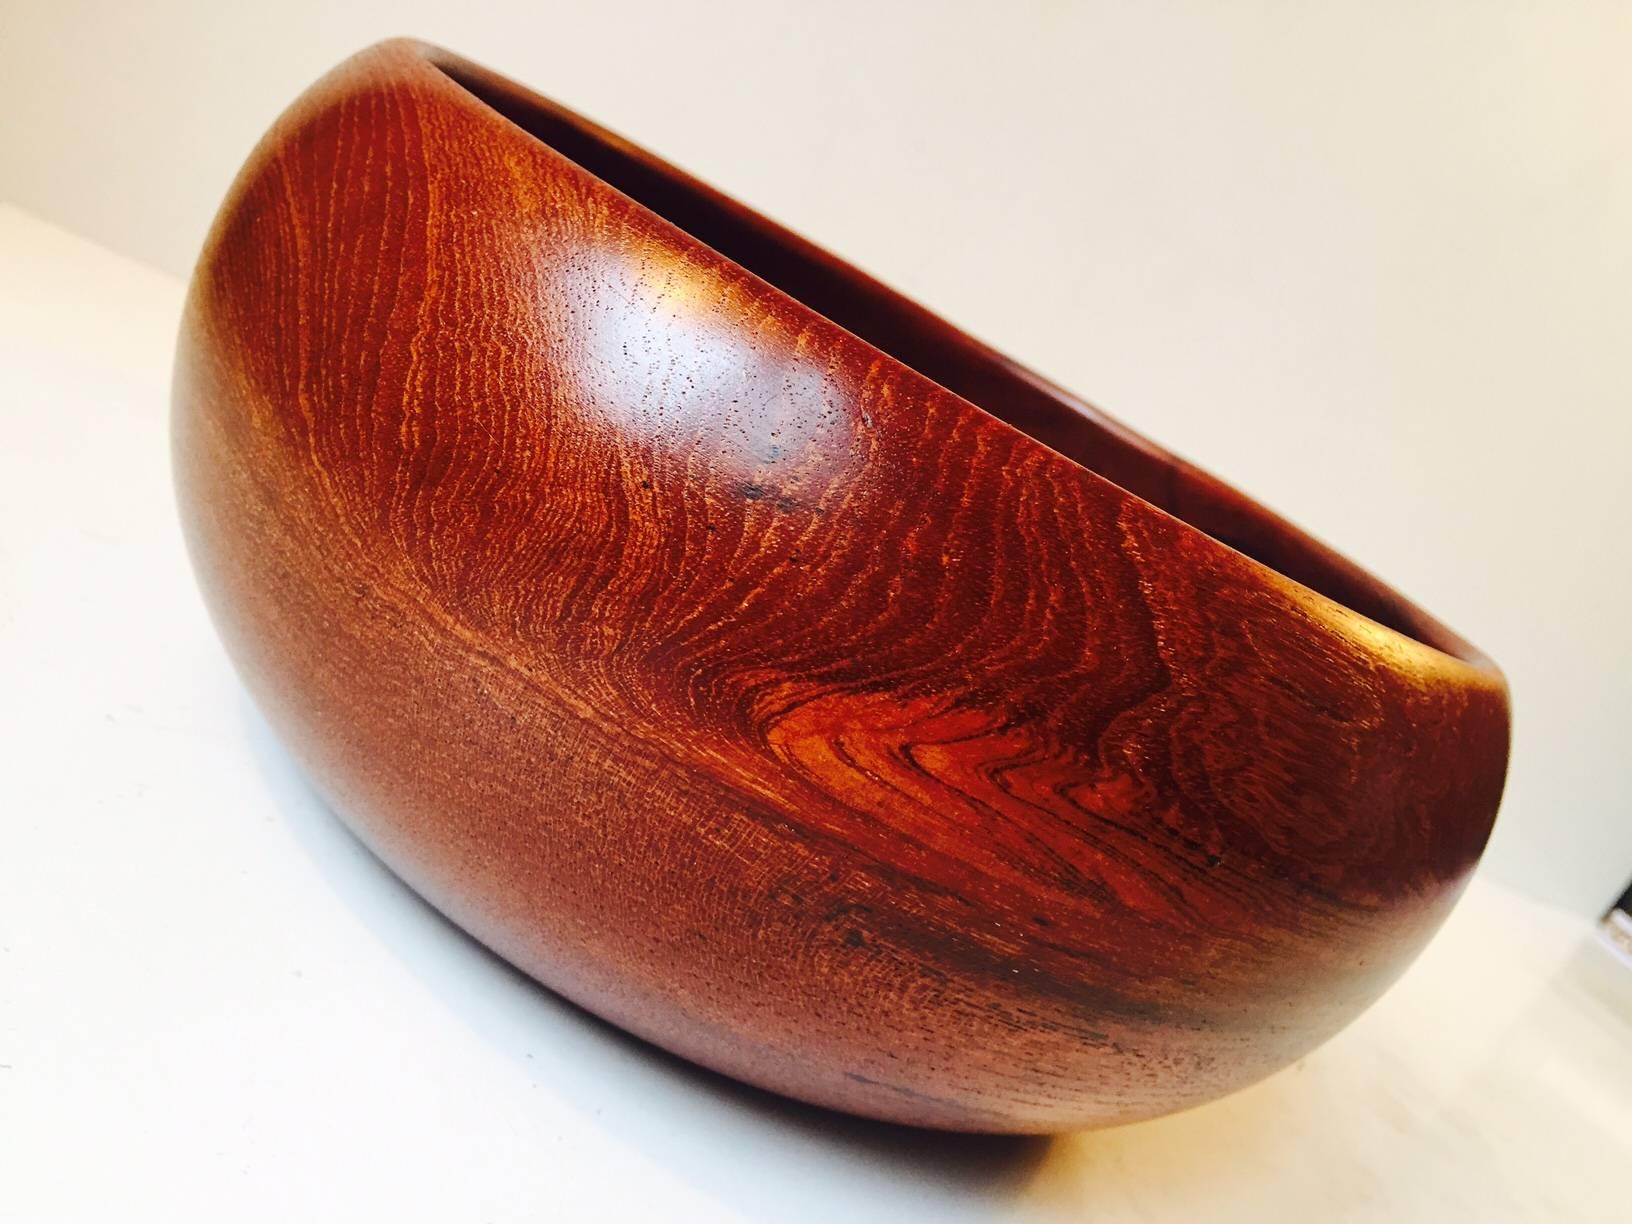 - Handmade bowl of solid Siamese teak
- Organic shape with emphasis on the grain pattern
- It has a tiny scare/hair-line that has been restored respectfully.
- Manufactured and designed by Kay Bojesen in his workshop in Copenhagen during the